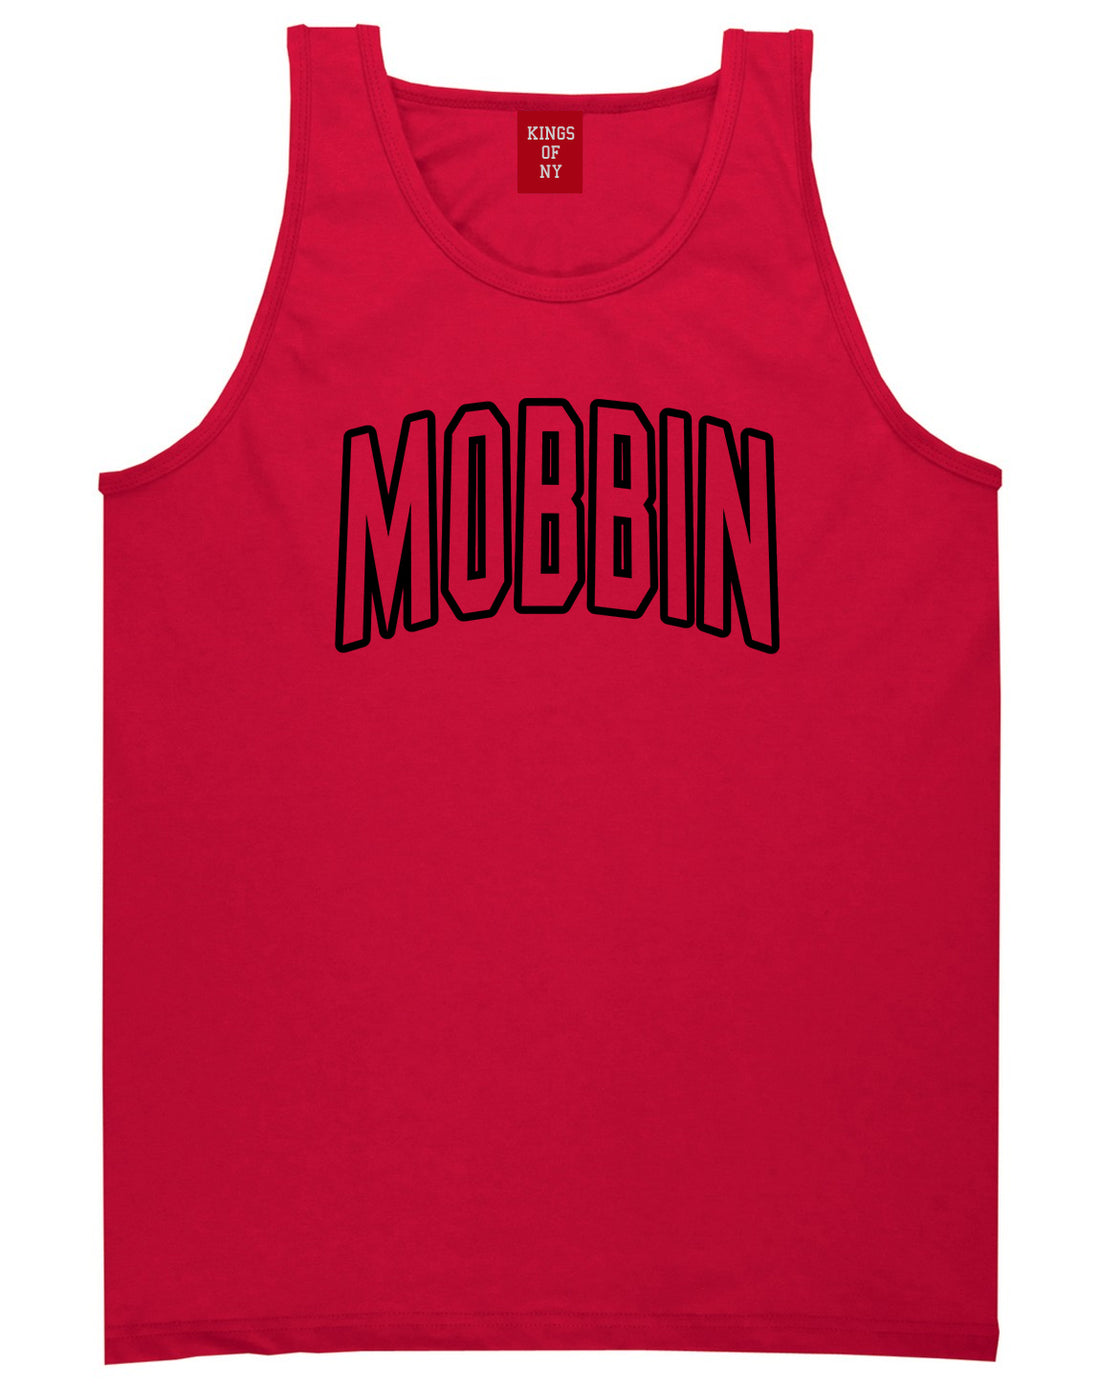 Mobbin Outline Squad Mens Tank Top Shirt Red by Kings Of NY